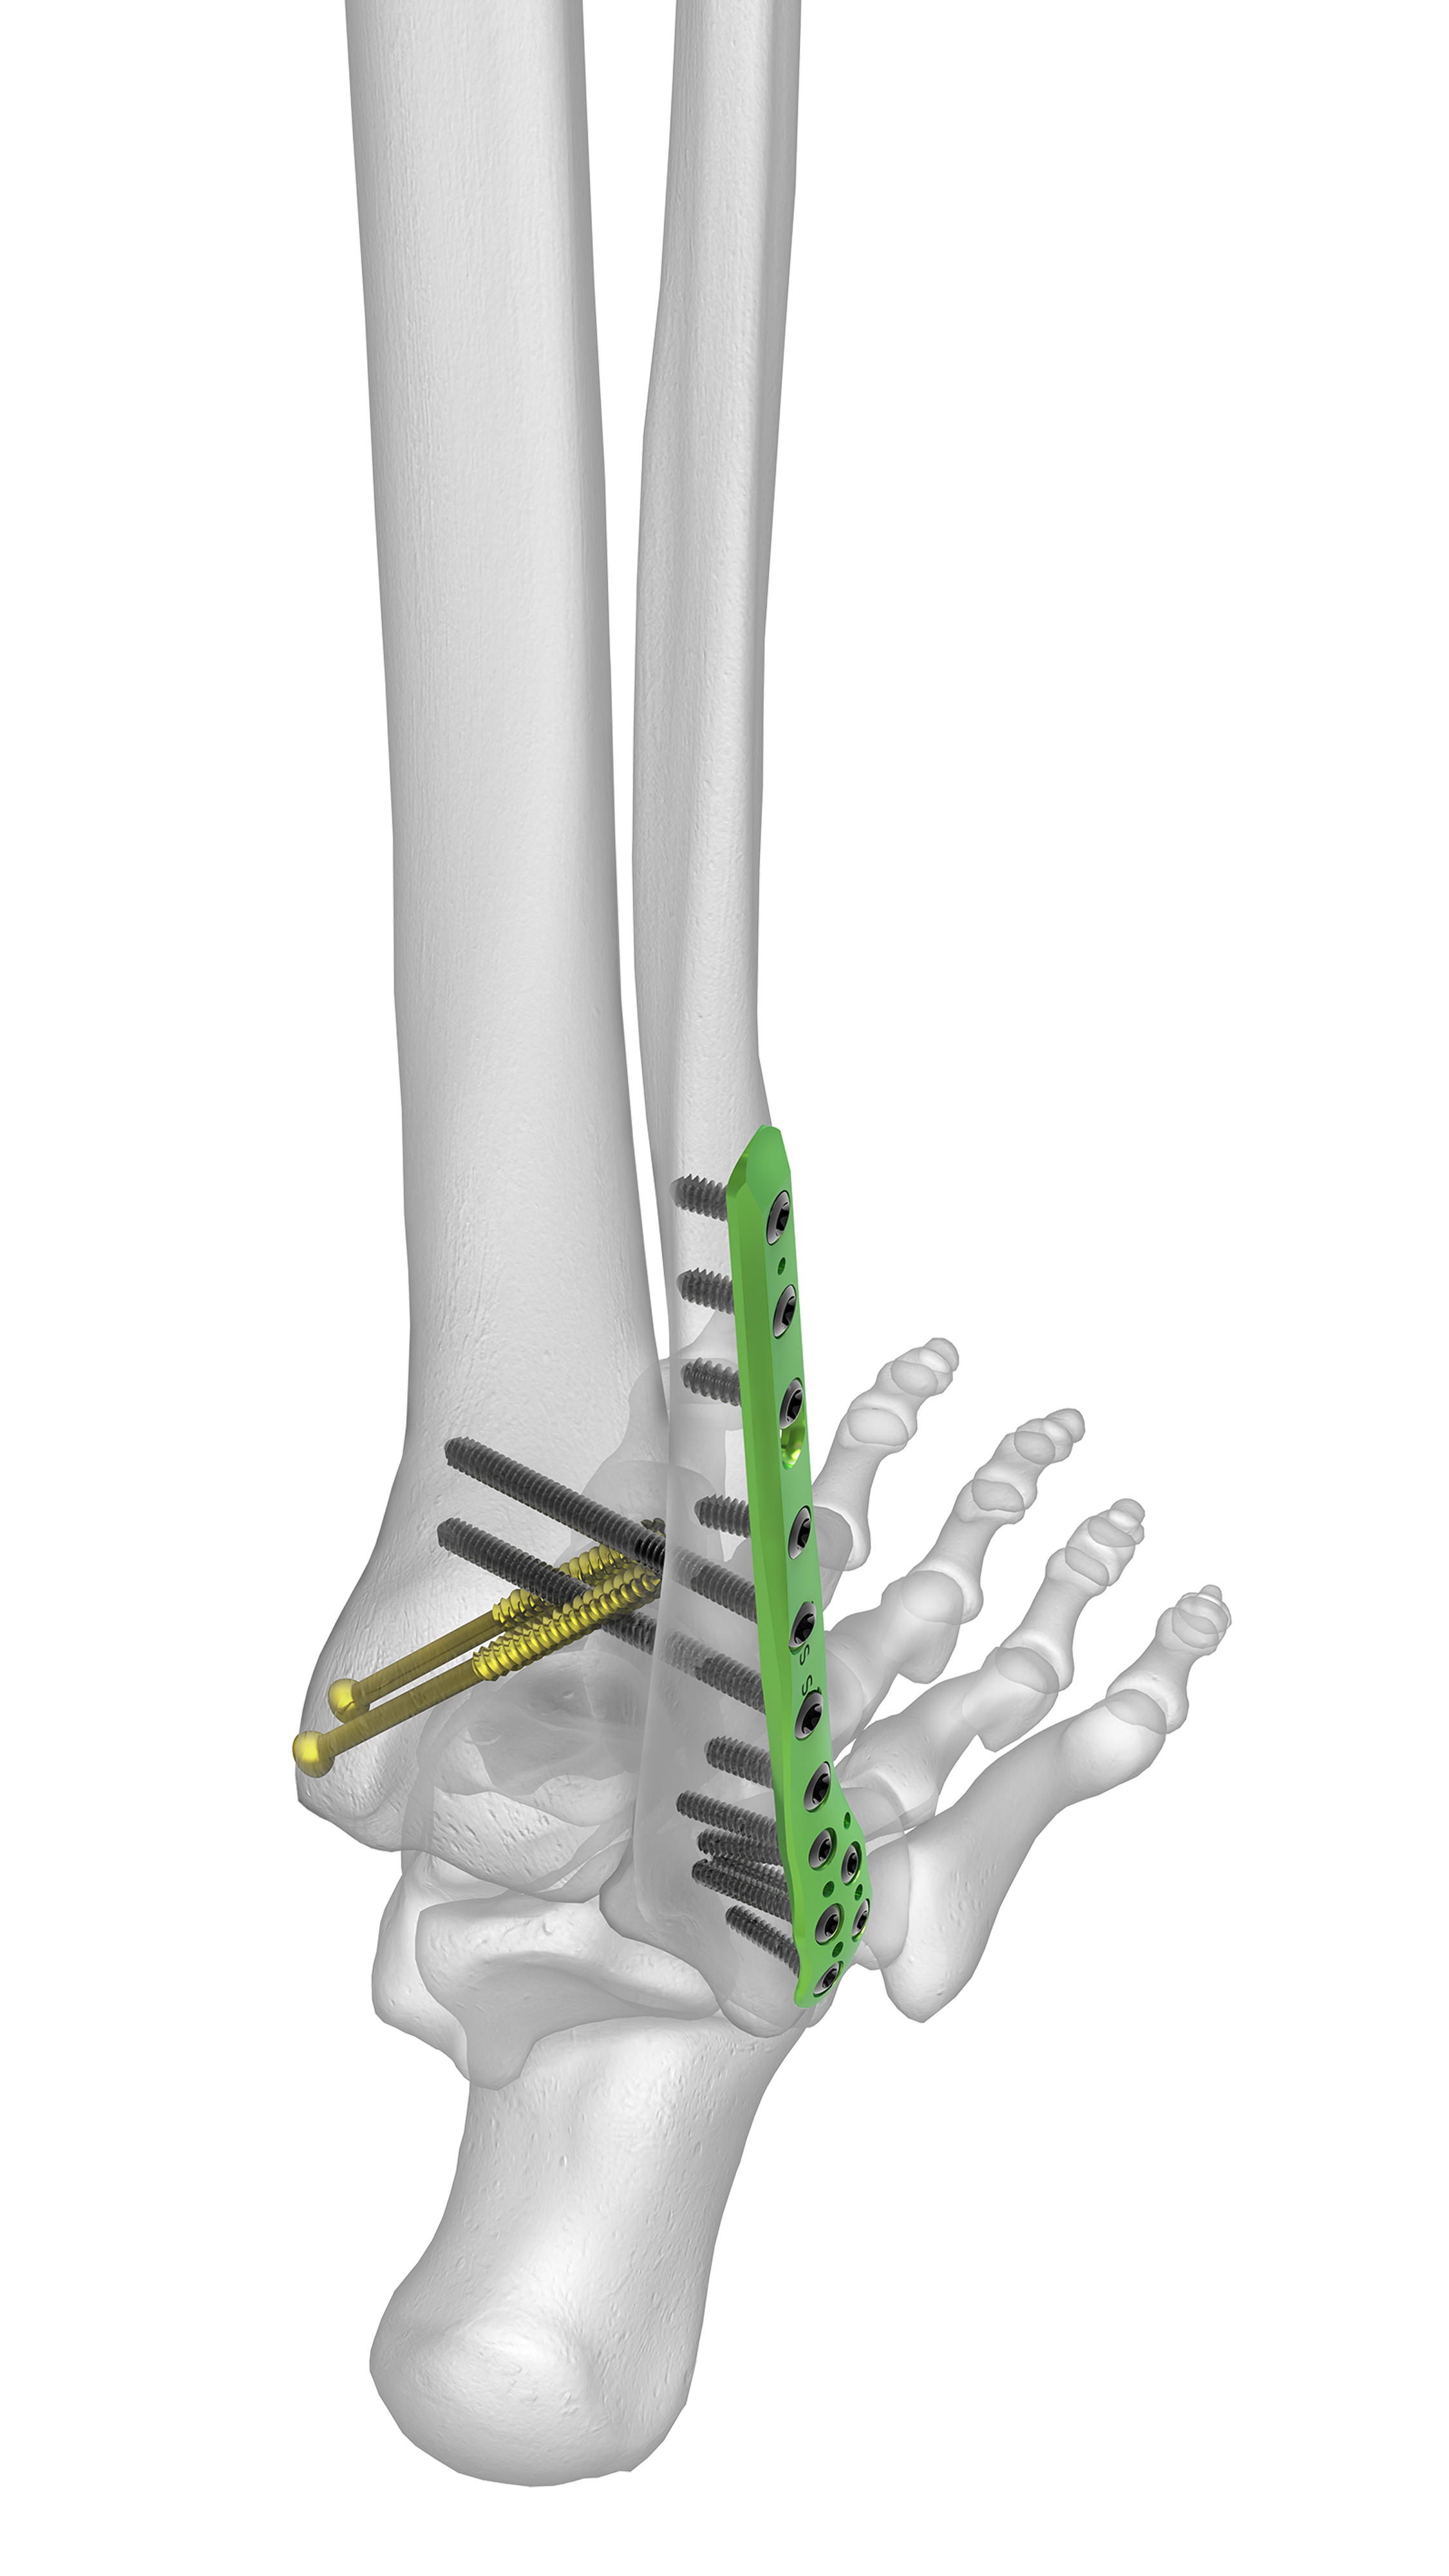 Ankle Plating System 3 | Acumed